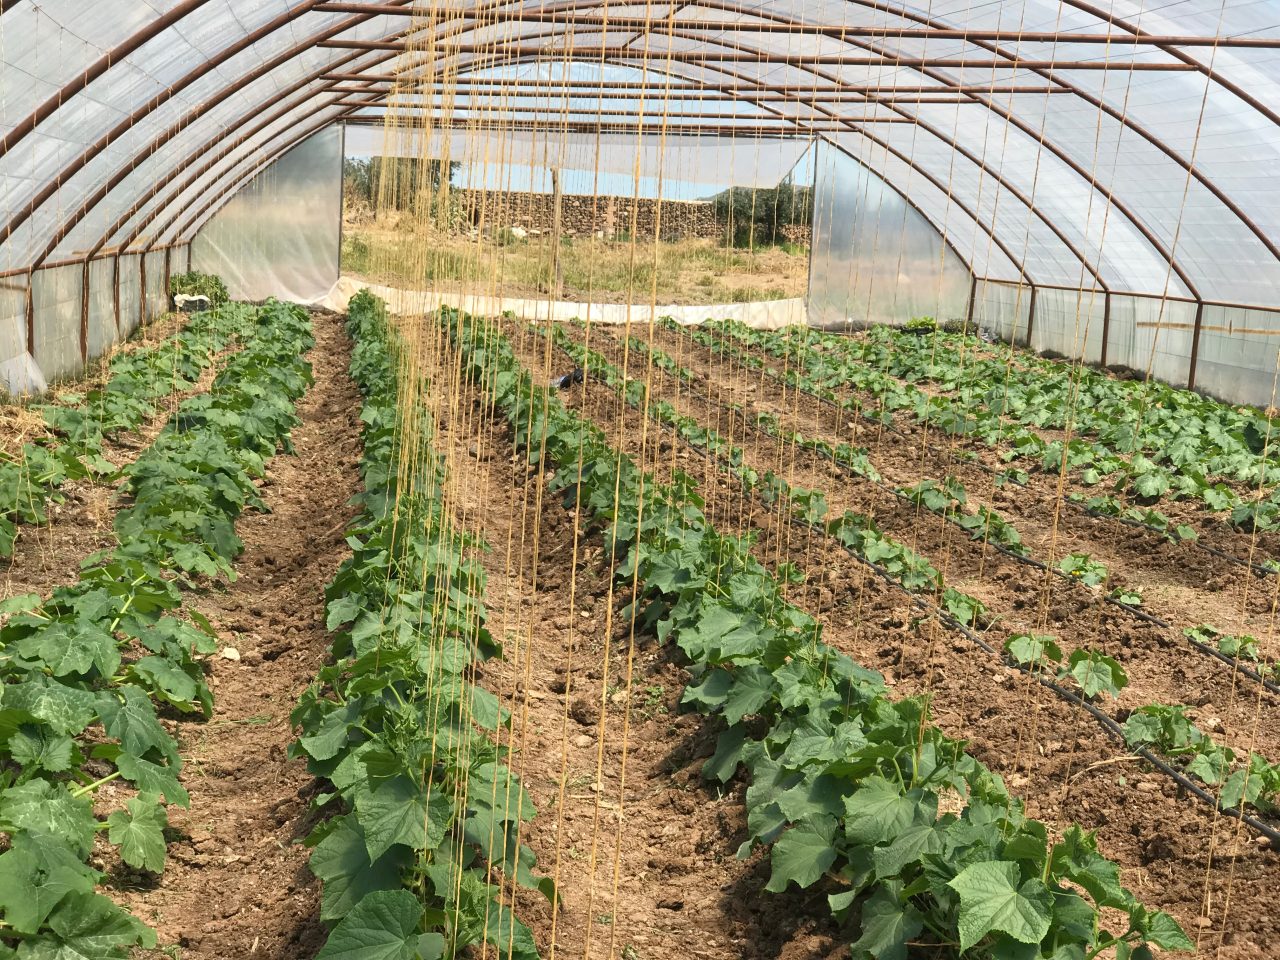 Greenhouse farming to tackle food insecurity in Syria